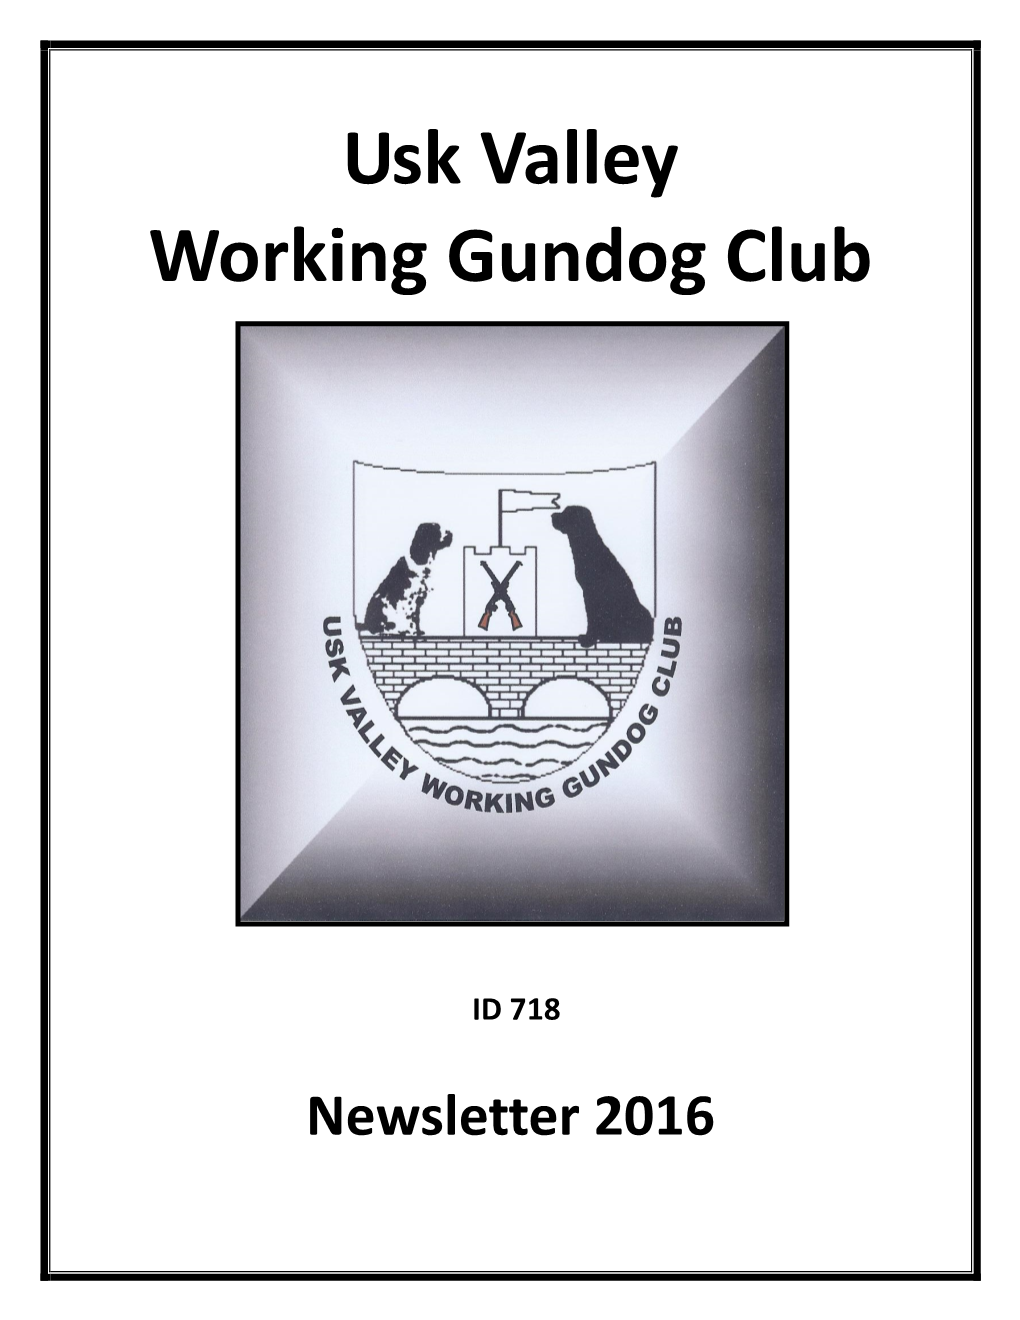 Our Newsletter 2016